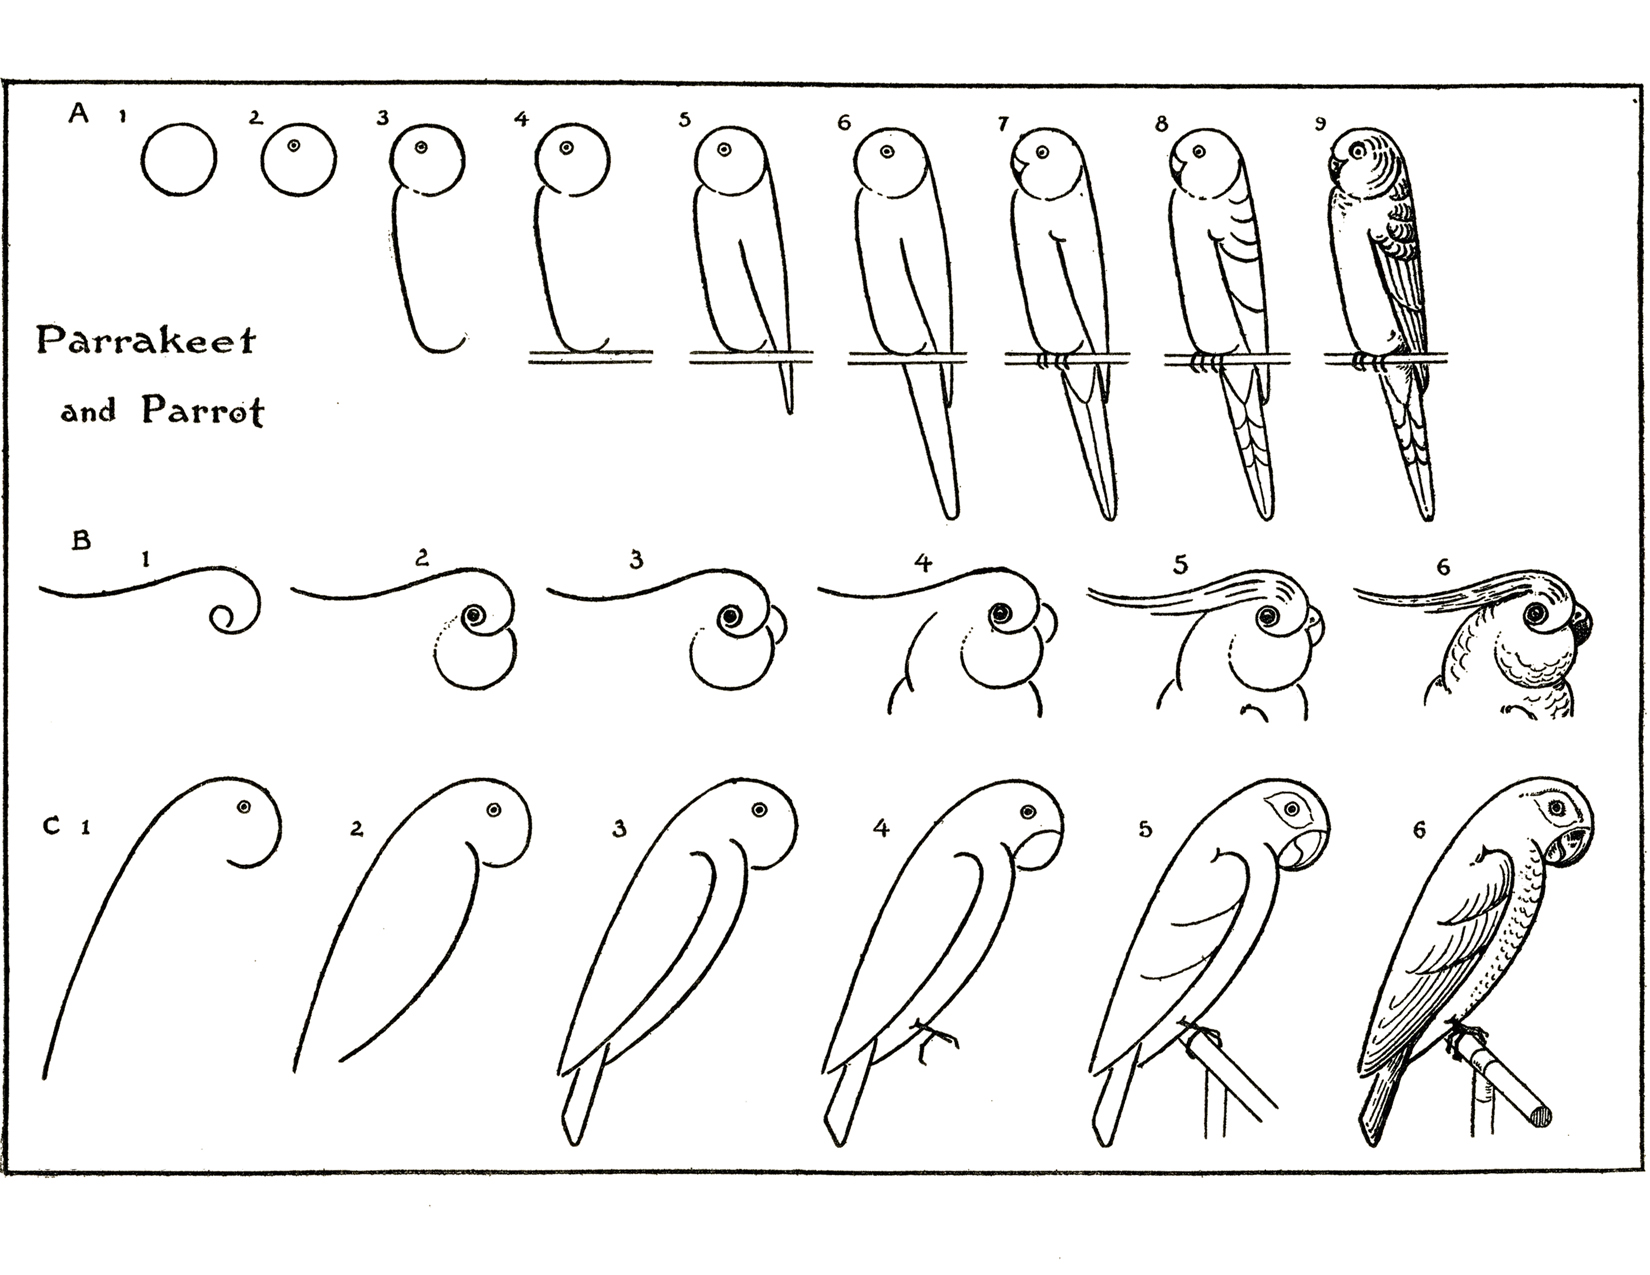 How to Draw Parrots! The Graphics Fairy